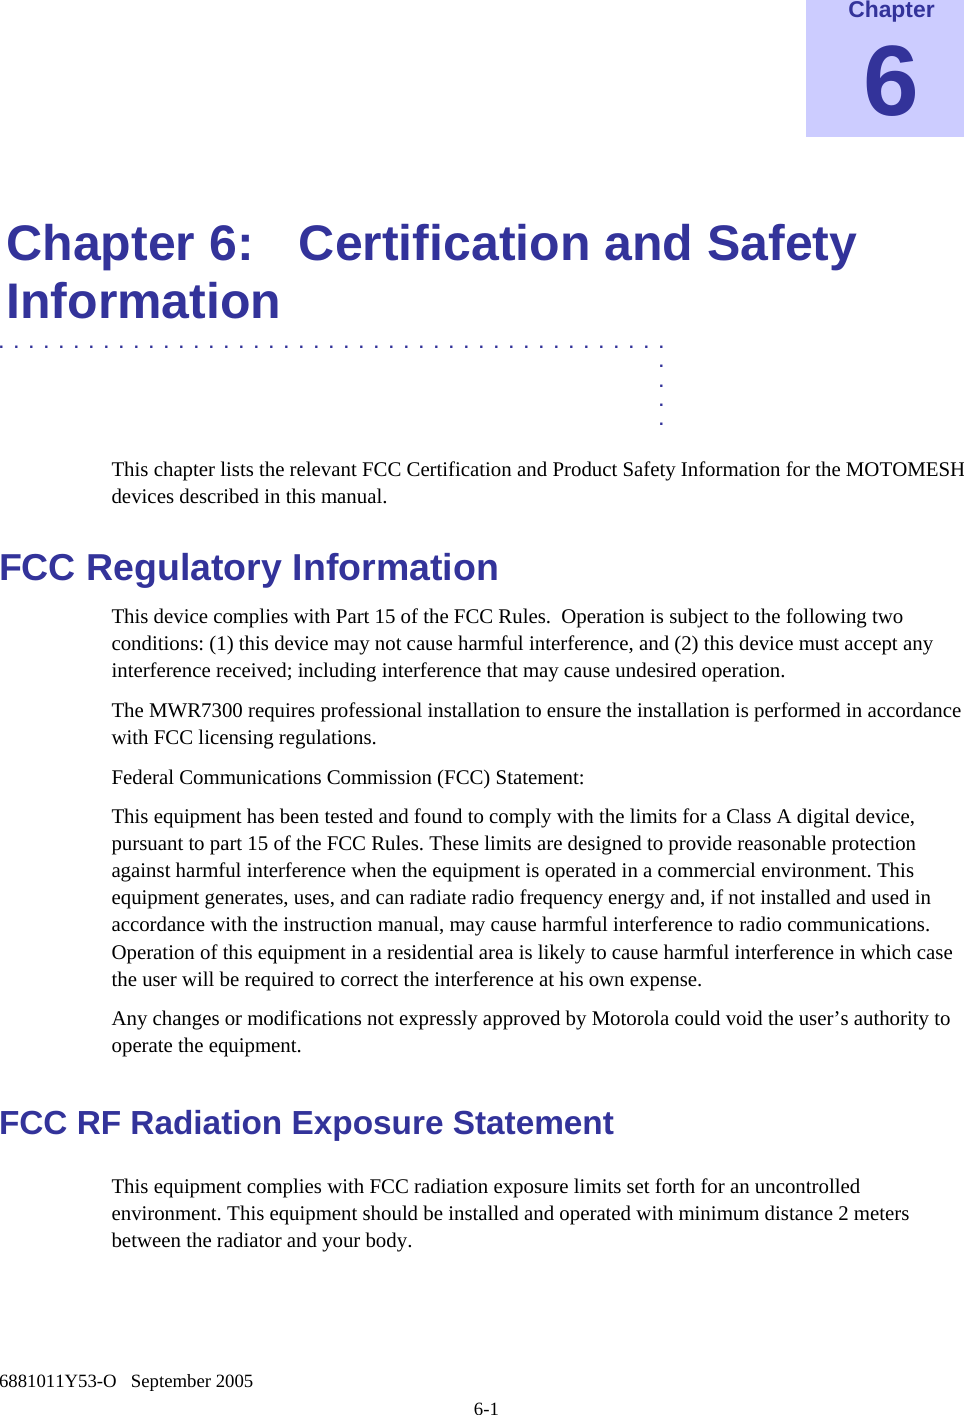    6881011Y53-O   September 2005 6-1 Chapter 6  Chapter 6:  Certification and Safety Information .............................................  .  .  .  . This chapter lists the relevant FCC Certification and Product Safety Information for the MOTOMESH devices described in this manual. FCC Regulatory Information This device complies with Part 15 of the FCC Rules.  Operation is subject to the following two conditions: (1) this device may not cause harmful interference, and (2) this device must accept any interference received; including interference that may cause undesired operation. The MWR7300 requires professional installation to ensure the installation is performed in accordance with FCC licensing regulations.   Federal Communications Commission (FCC) Statement: This equipment has been tested and found to comply with the limits for a Class A digital device, pursuant to part 15 of the FCC Rules. These limits are designed to provide reasonable protection against harmful interference when the equipment is operated in a commercial environment. This equipment generates, uses, and can radiate radio frequency energy and, if not installed and used in accordance with the instruction manual, may cause harmful interference to radio communications. Operation of this equipment in a residential area is likely to cause harmful interference in which case the user will be required to correct the interference at his own expense.  Any changes or modifications not expressly approved by Motorola could void the user’s authority to operate the equipment. FCC RF Radiation Exposure Statement This equipment complies with FCC radiation exposure limits set forth for an uncontrolled environment. This equipment should be installed and operated with minimum distance 2 meters      between the radiator and your body.  